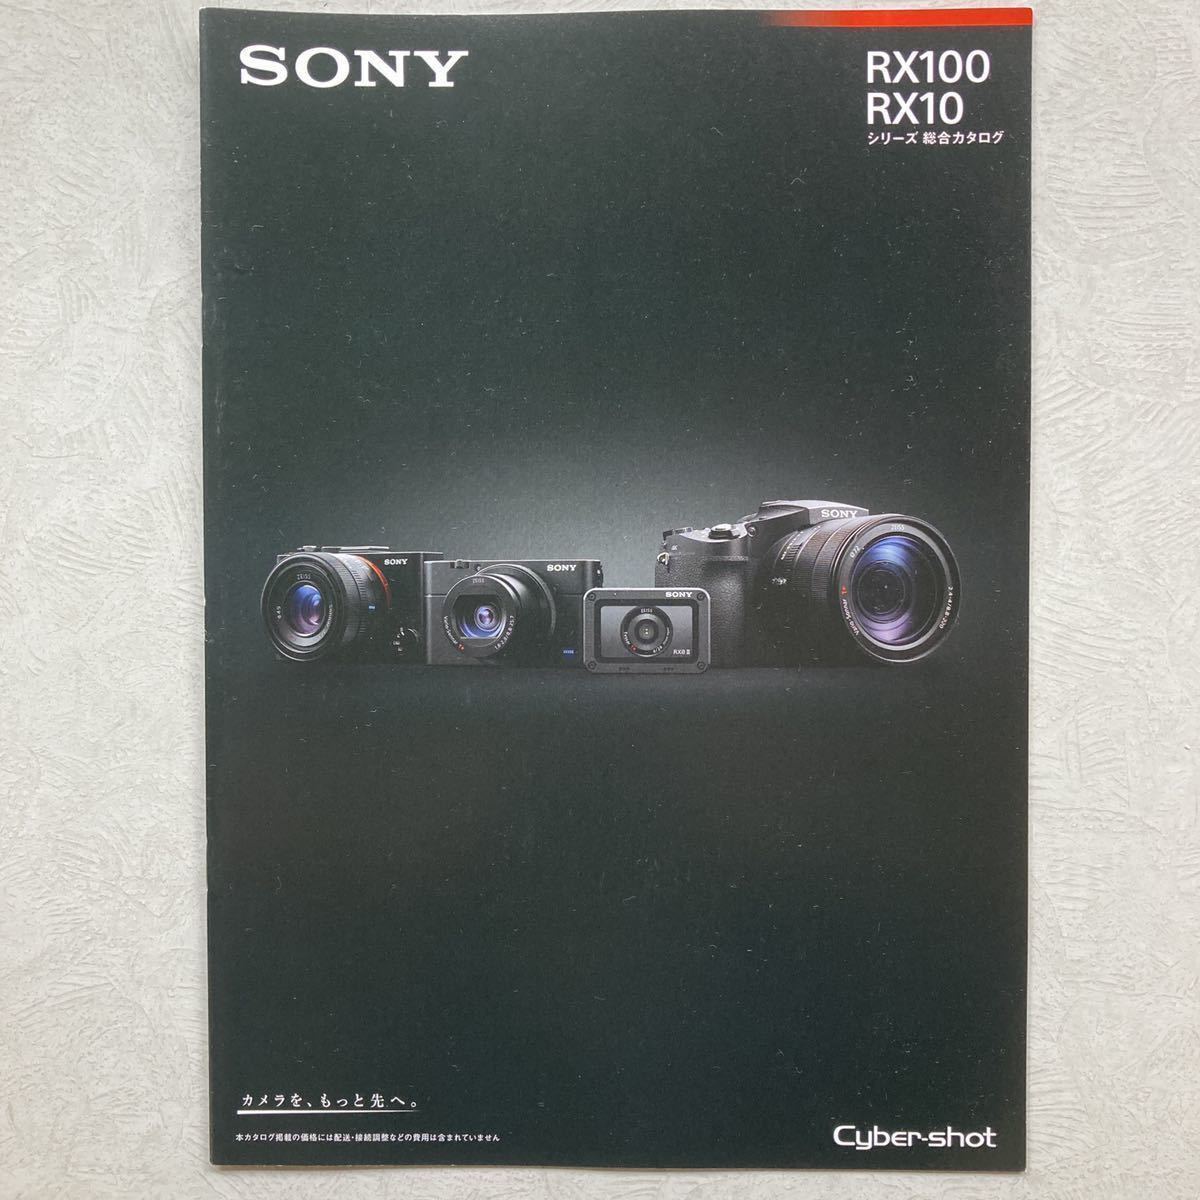  free shipping Sony camera lens catalog [ SONY RX100 RX10 series general catalogue ]Zeiss RX1 RX1R II III IV V RX0 Cyber-shot